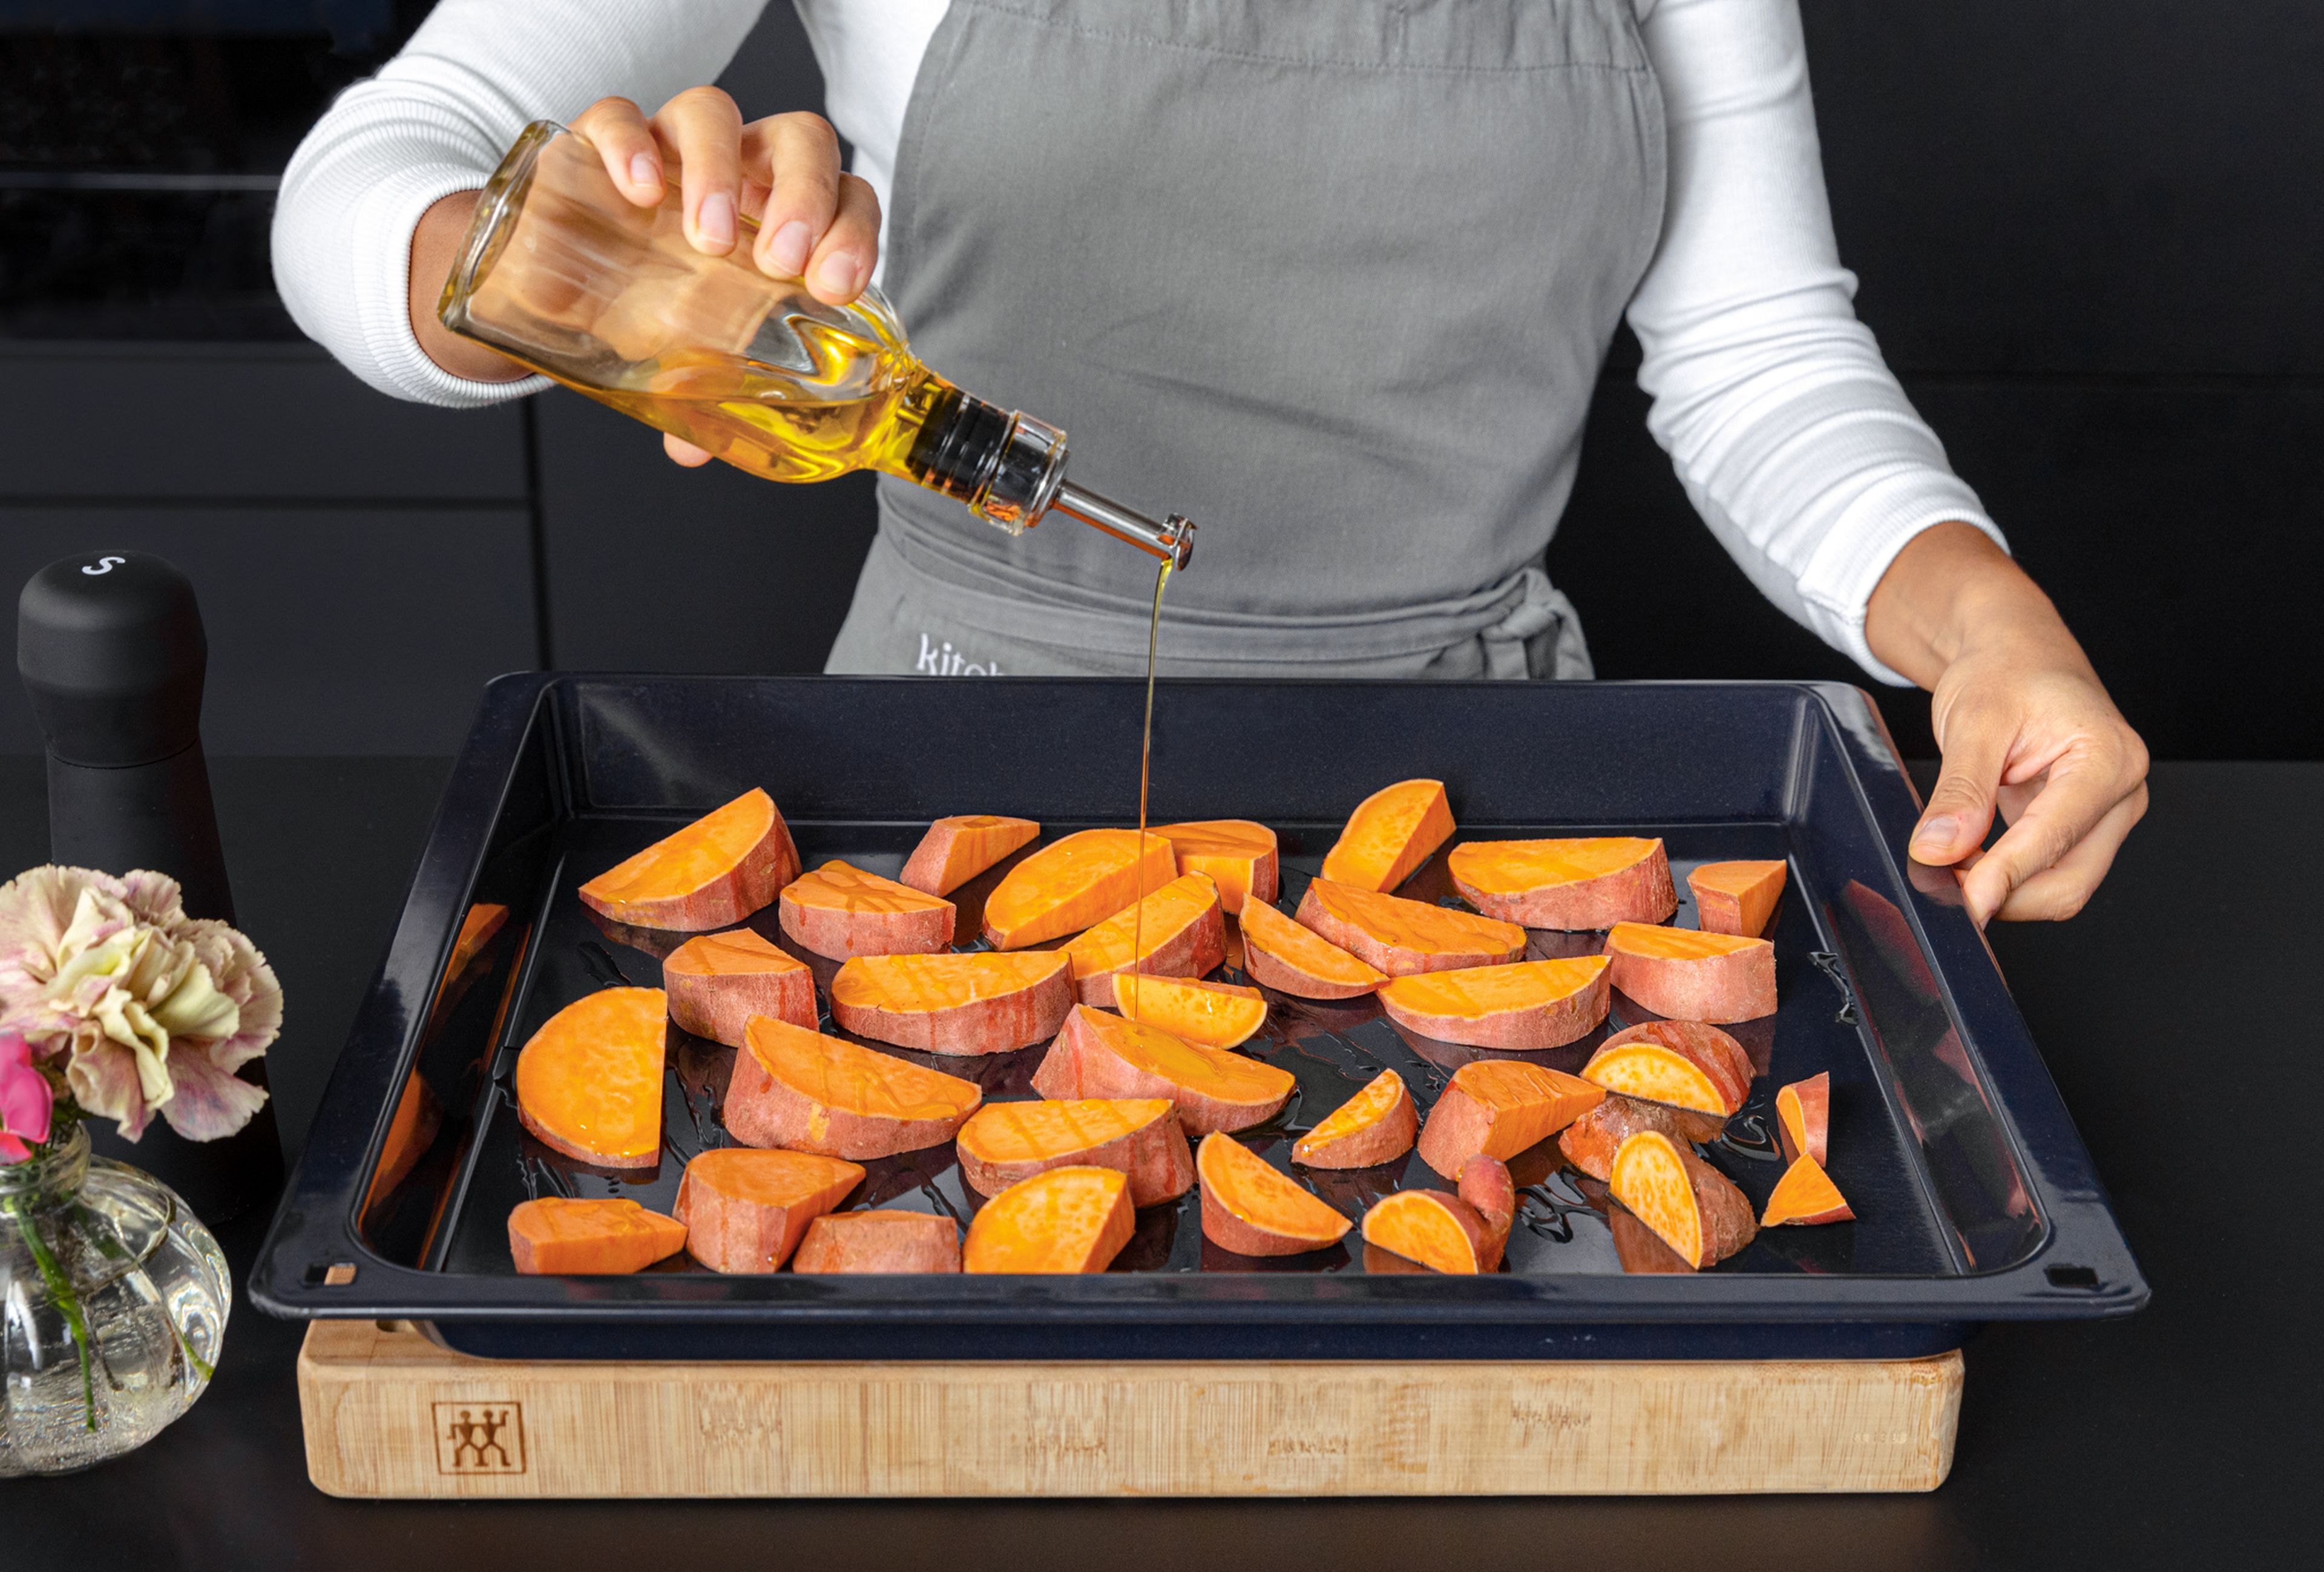 Preheat the oven to 200°C/400°F. With the skin on, slice the sweet potatoes into wedges. Transfer to a baking sheet, drizzle with some olive oil, season with salt and toss to combine. Let roast for approx. 25 - 30 min. or until the edges are brown and crisp.